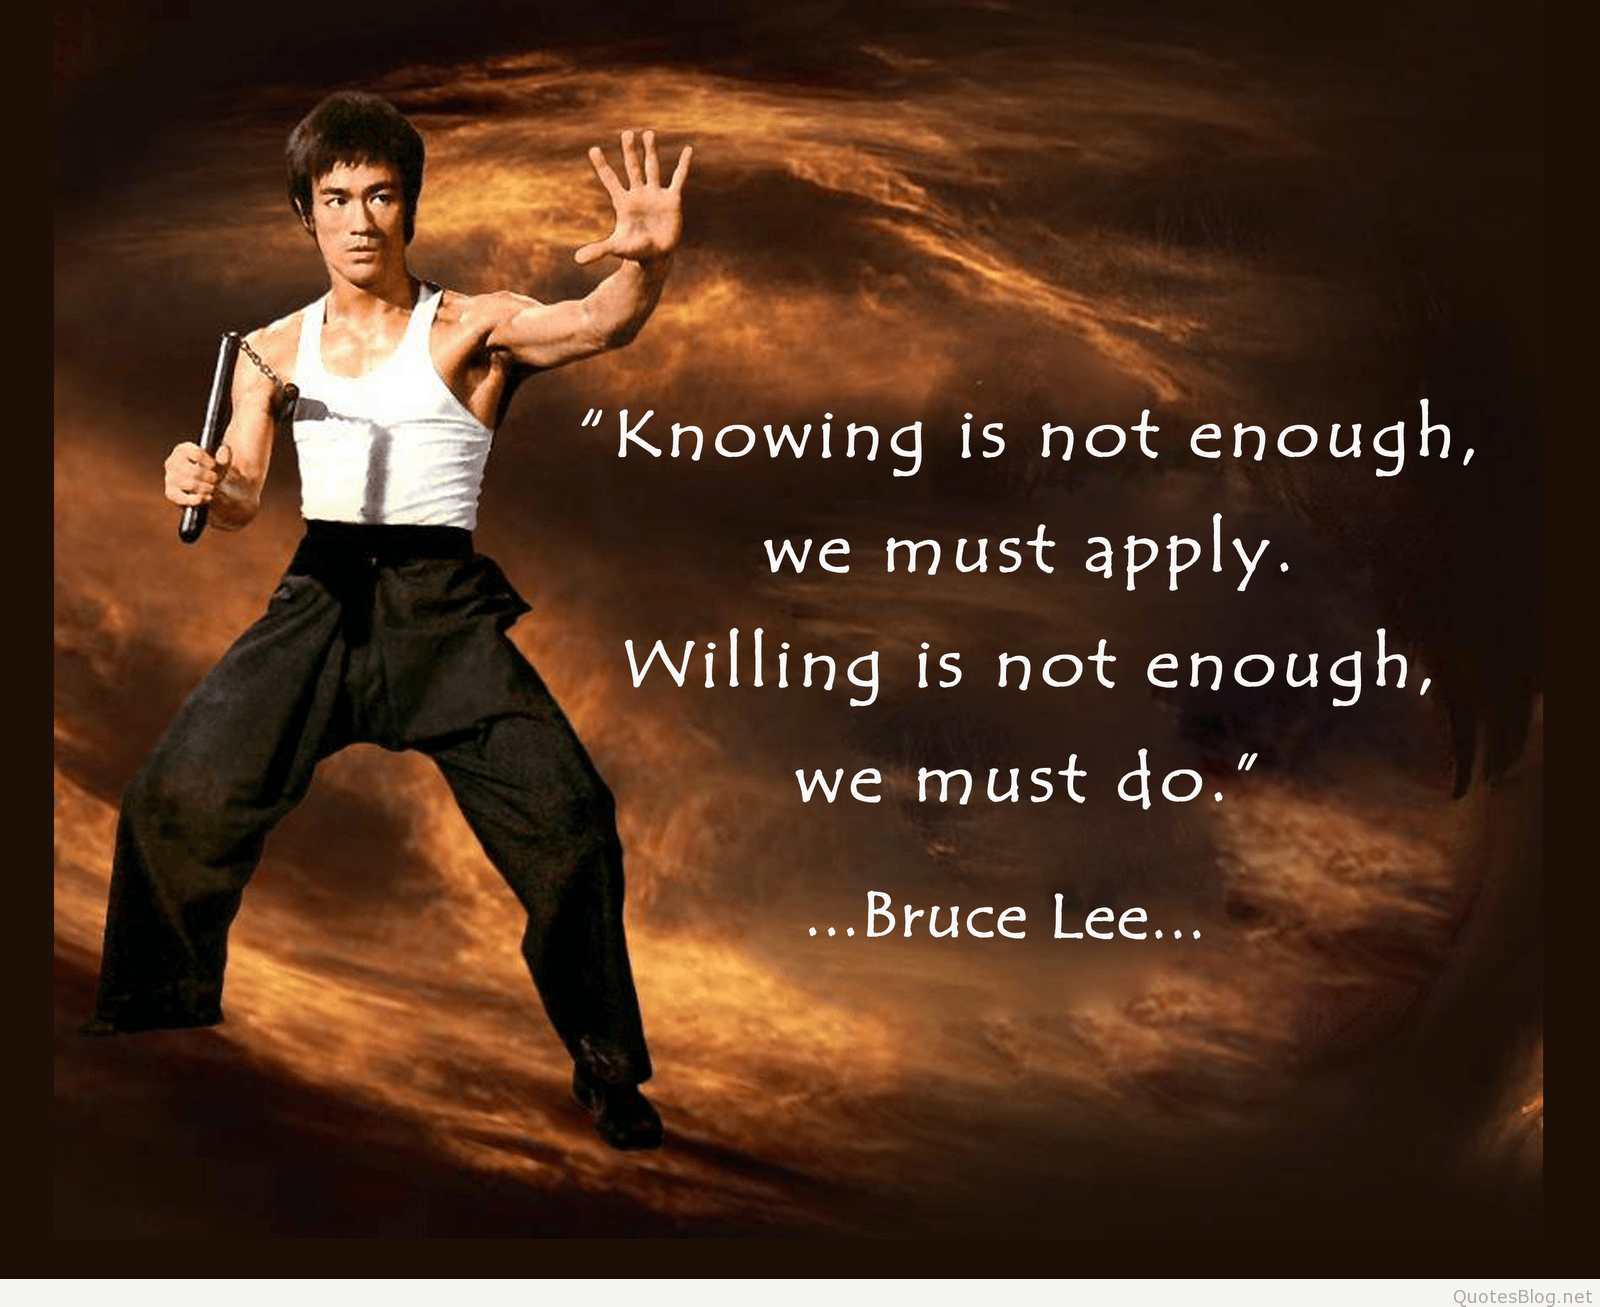 Best Bruce Lee Quotes and Sayings